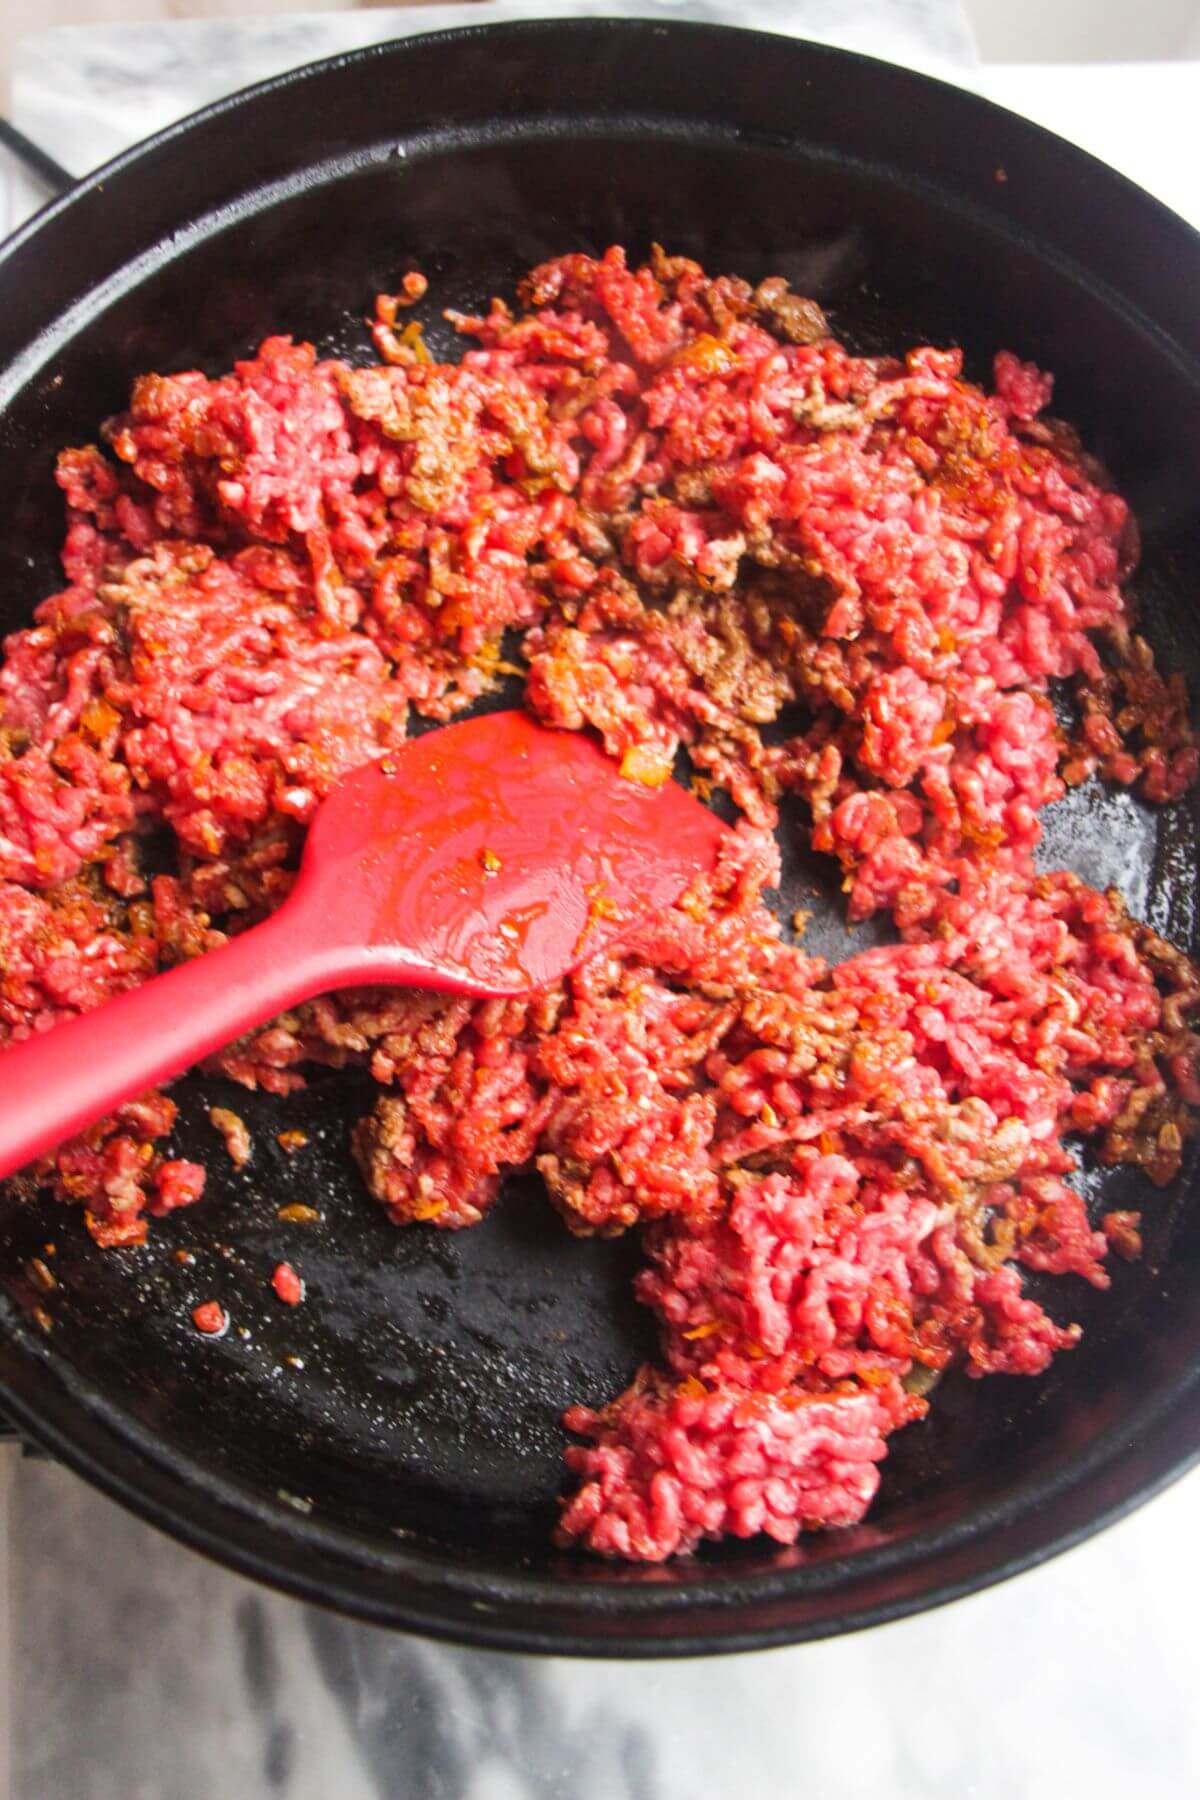 Beef mince added to a large black pan with a red spatula stirring it.